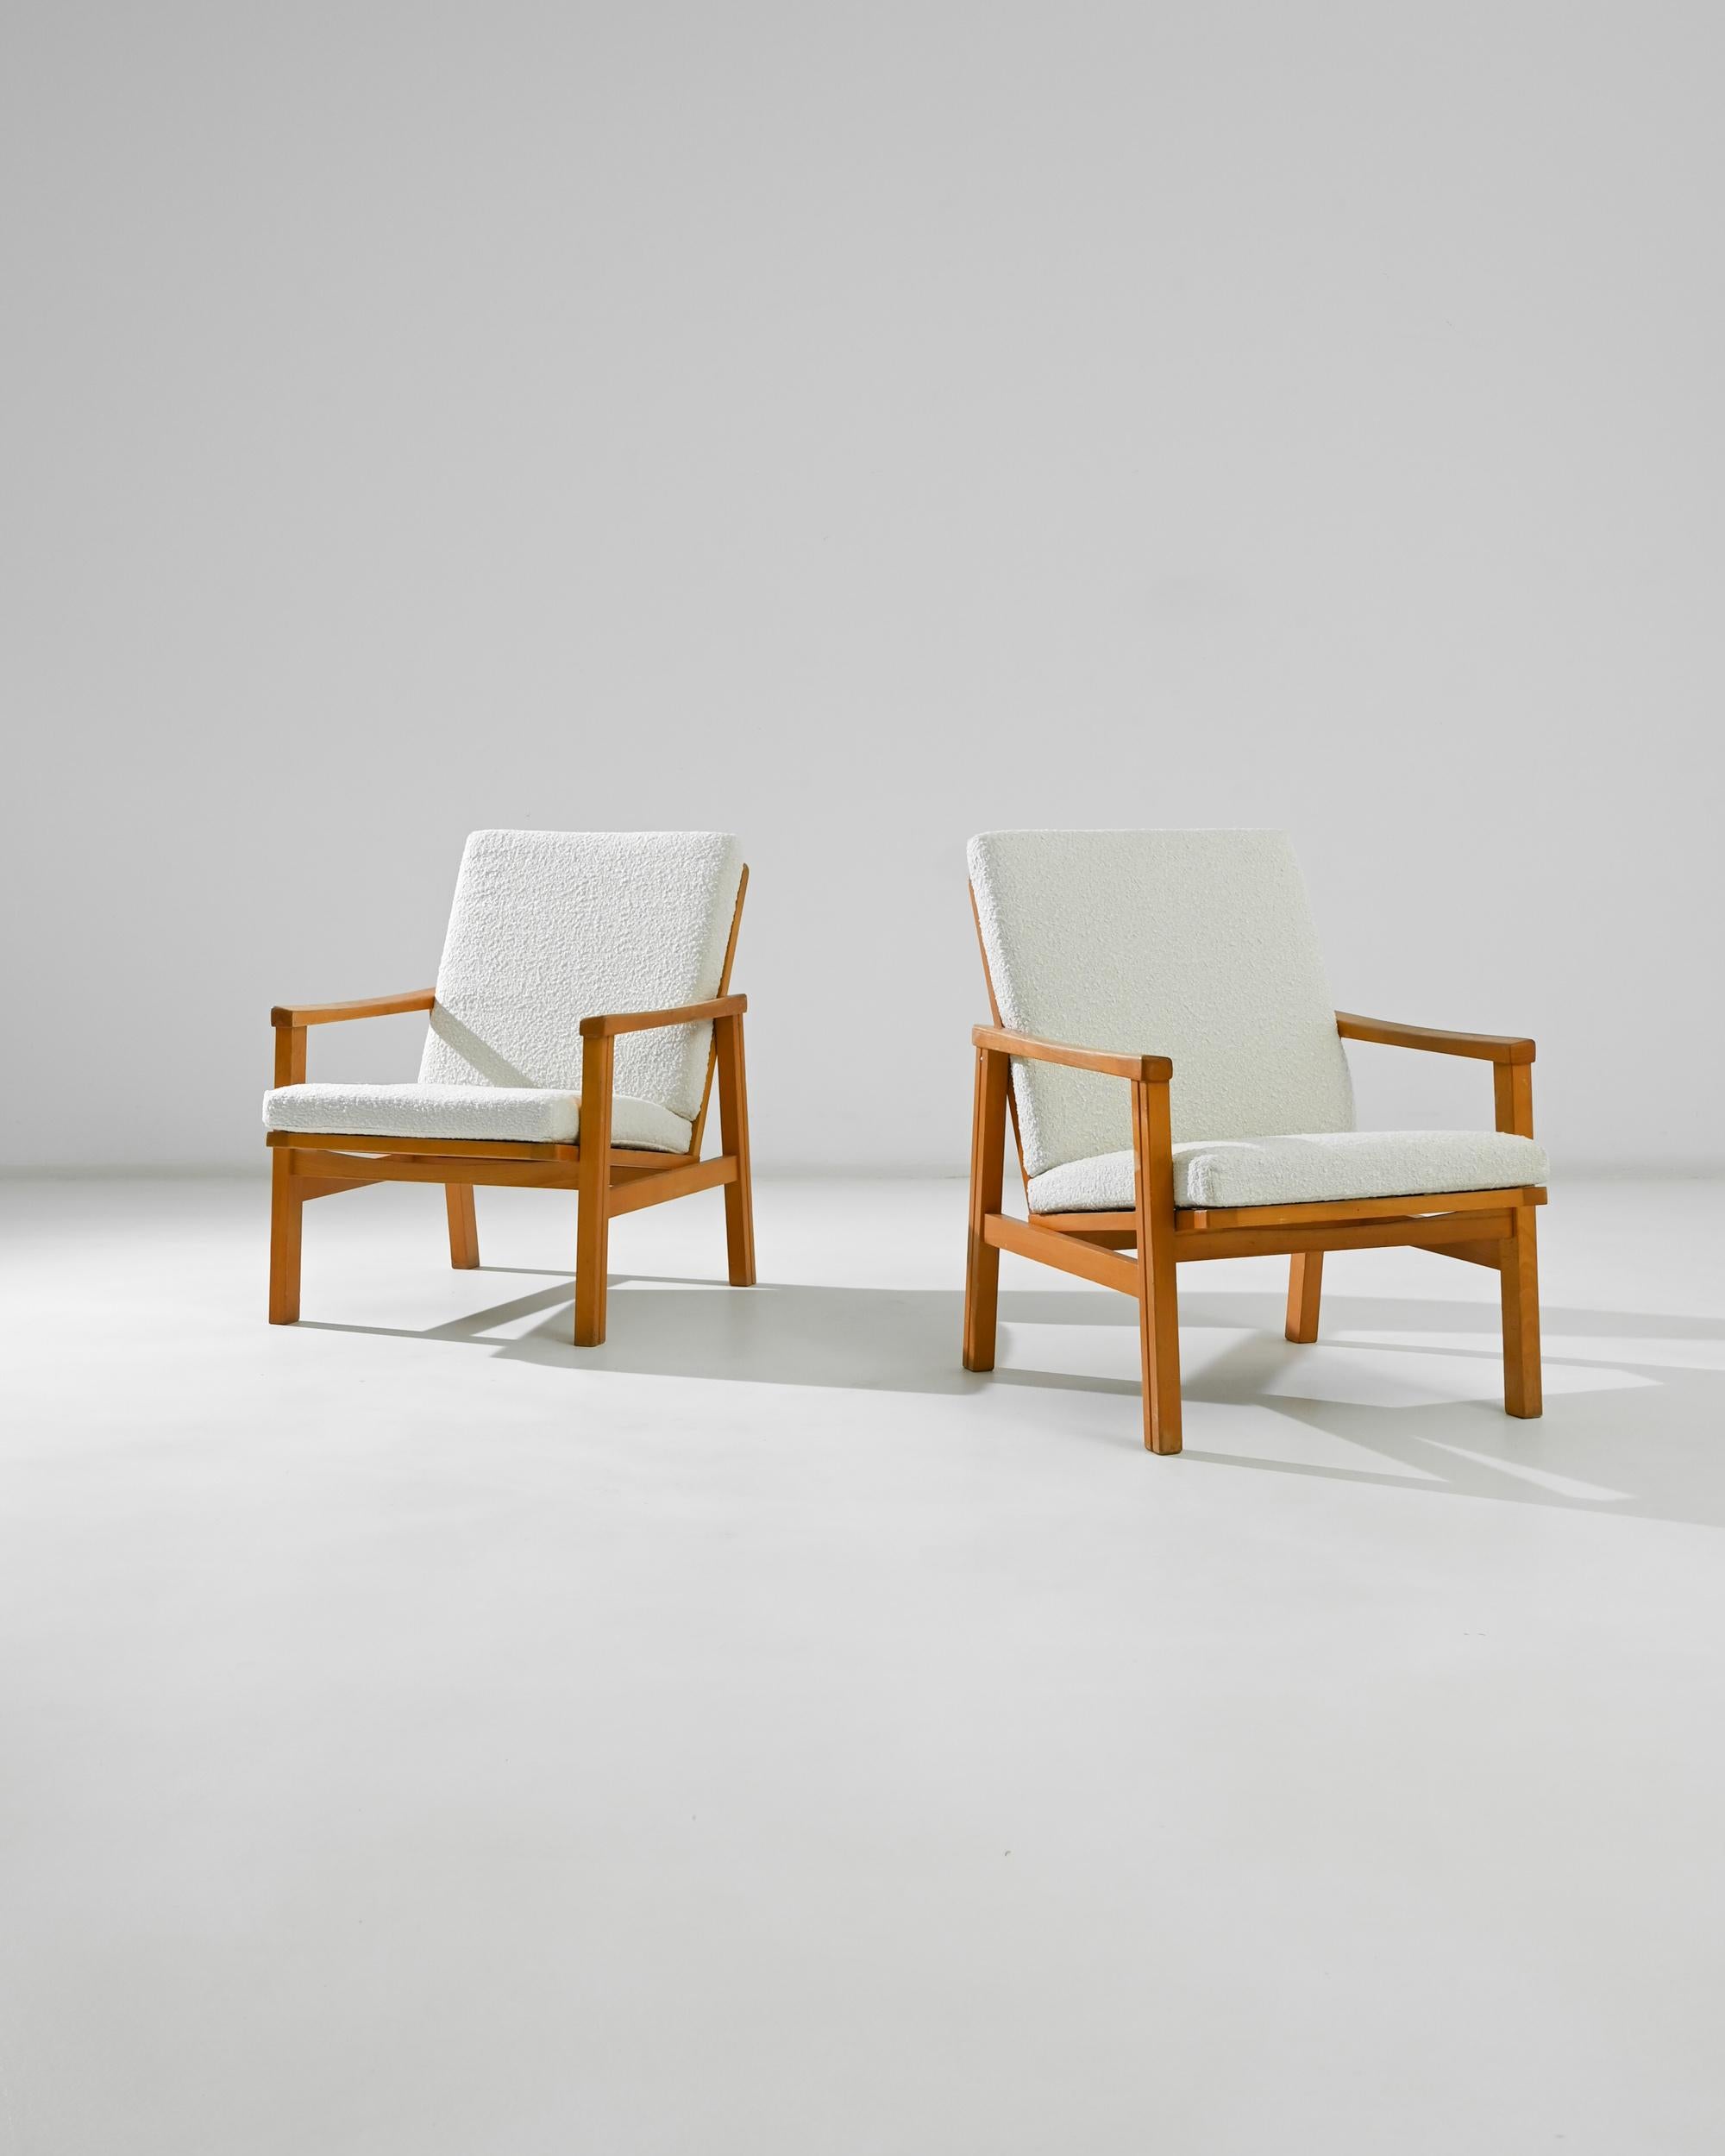 Introducing a pair of timeless elegance: these 1960s Czech Wooden Armchairs. Crafted with precision and care, each chair embodies the essence of mid-century design. The rich, warm tones of the wood exude sophistication, while the sleek lines and